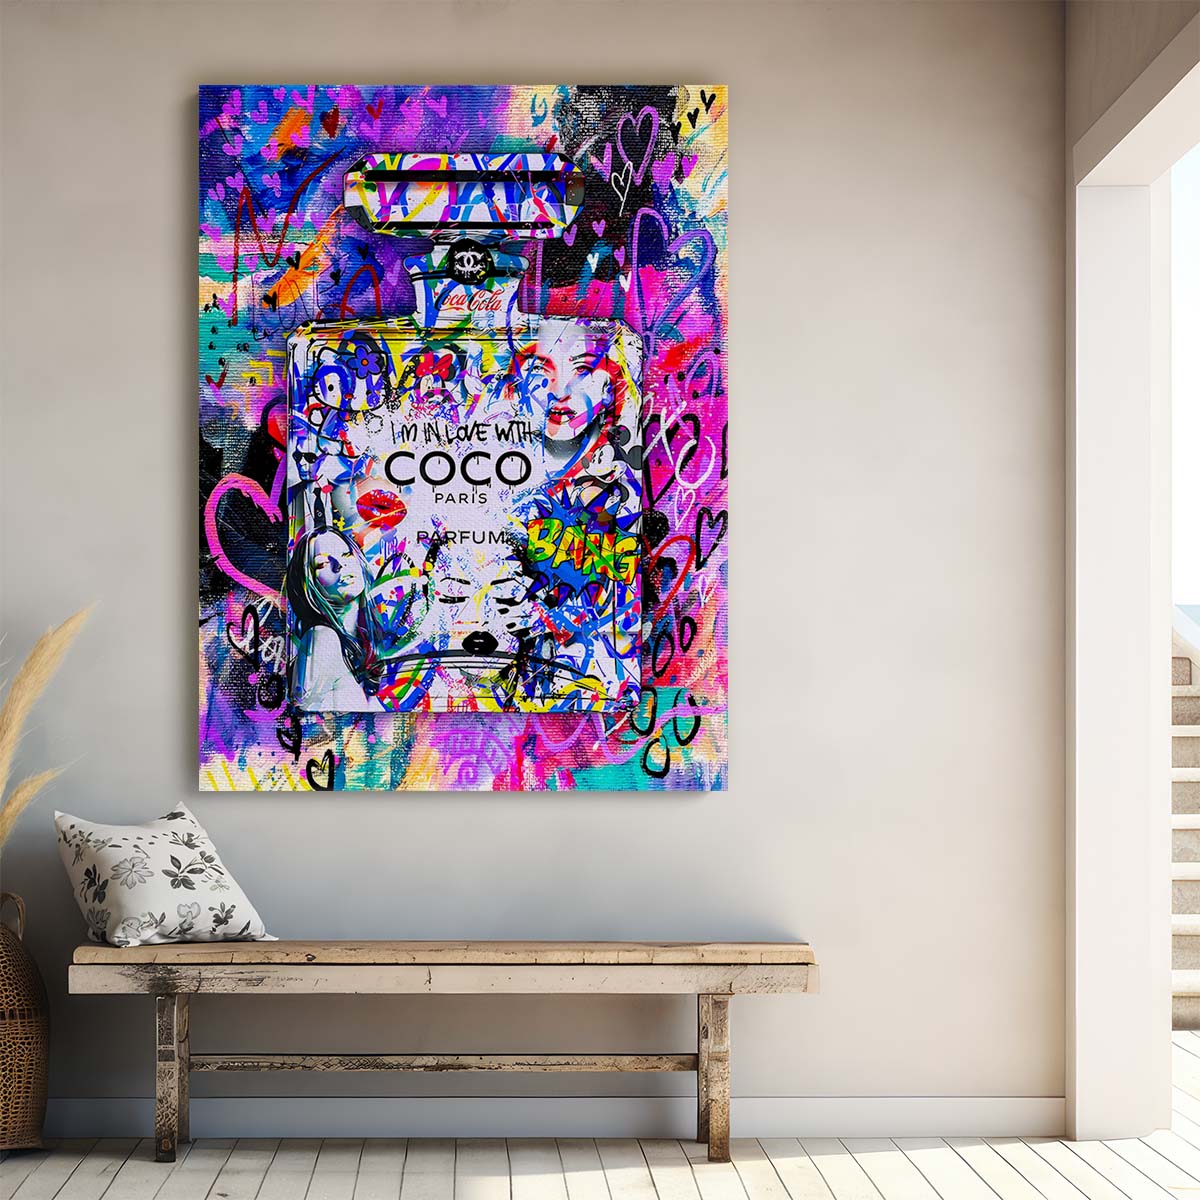 I Am In Love With Coco Chanel Perfume Graffiti Wall Art by Luxuriance Designs. Made in USA.